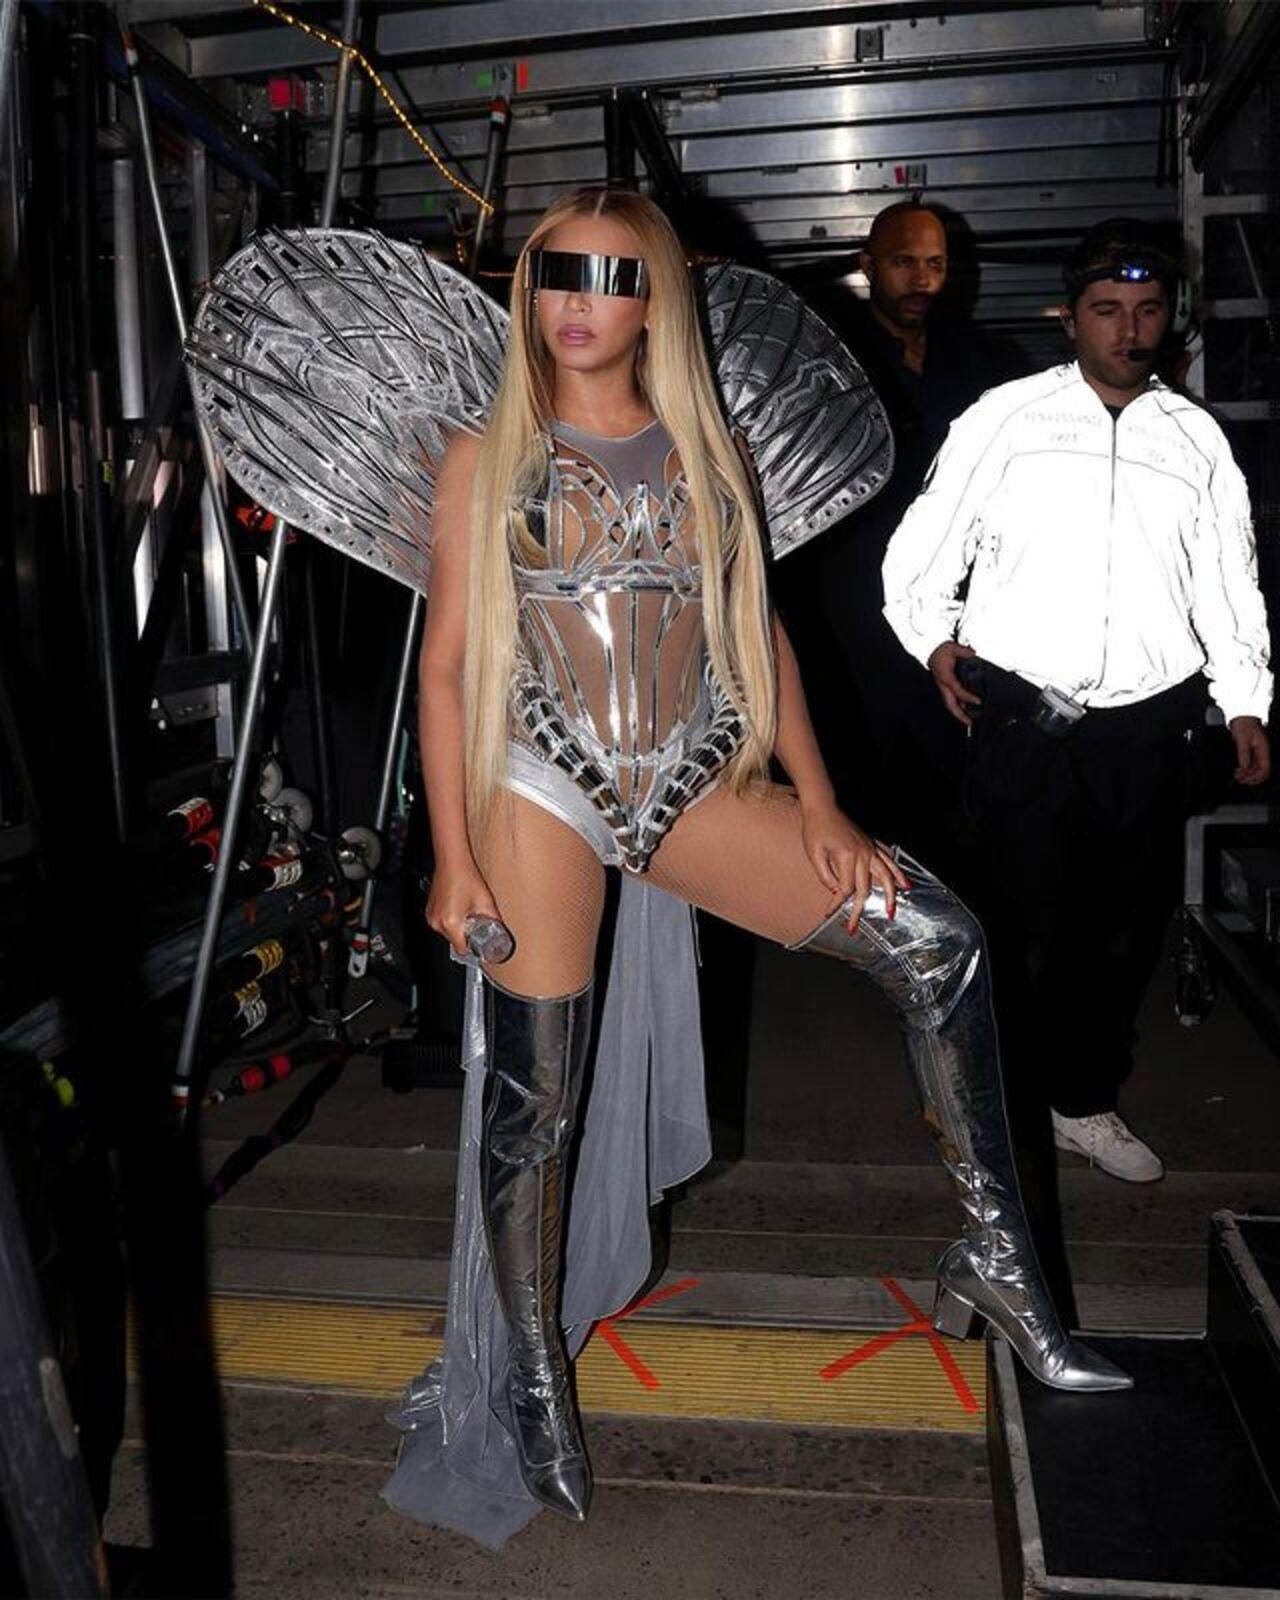 Winged fairy! In another risque move, Beyonce donned this flashy sheer emsemble with thigh-high boots